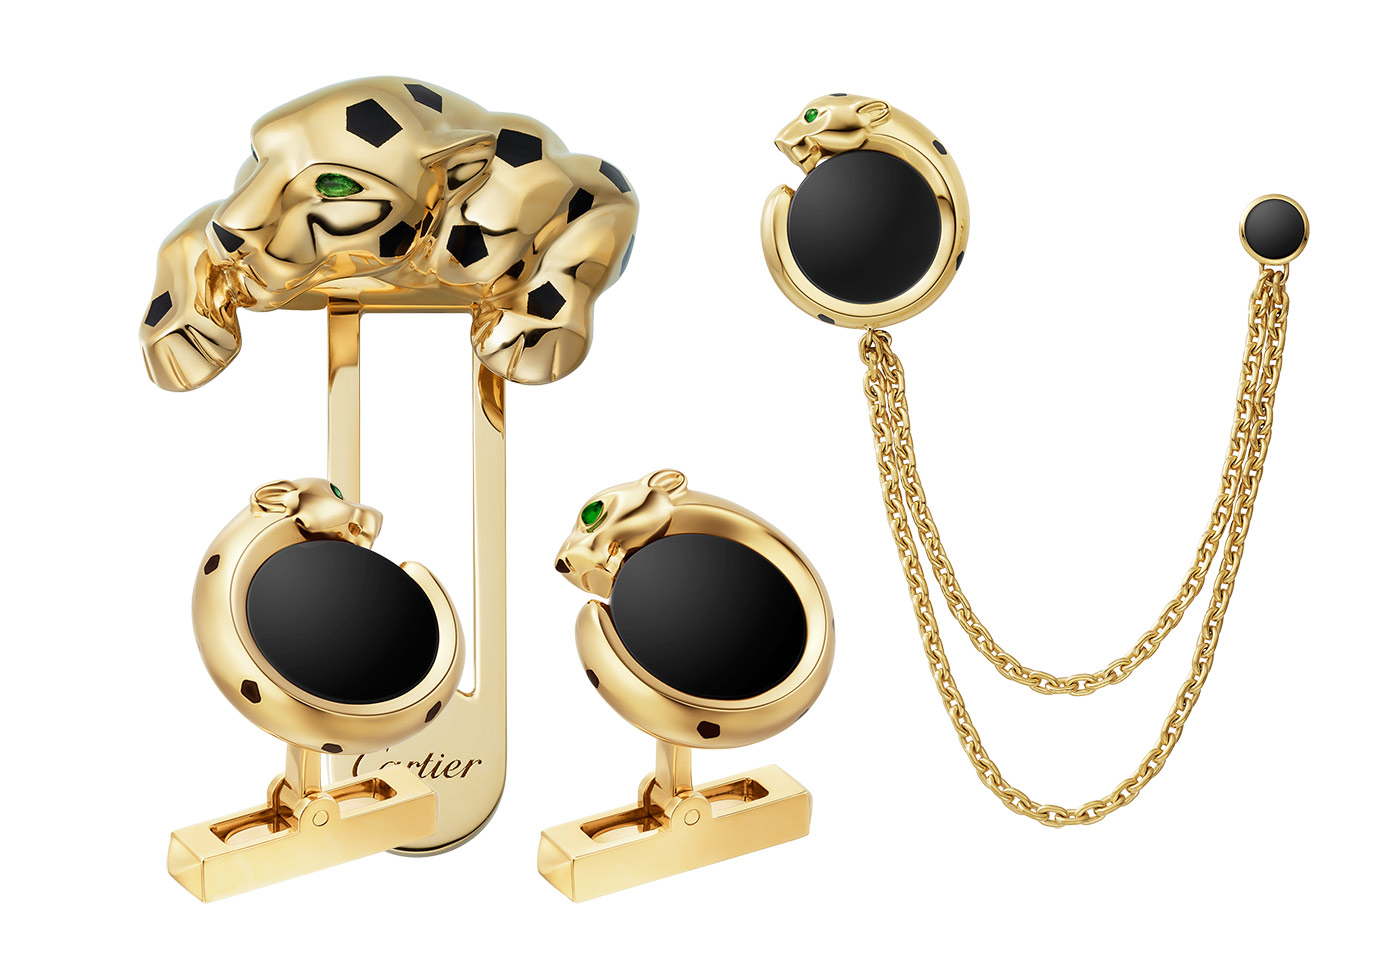 Cartier Panthère de Cartier cufflinks and men's accessories with onyx and emerald in 18k yellow gold